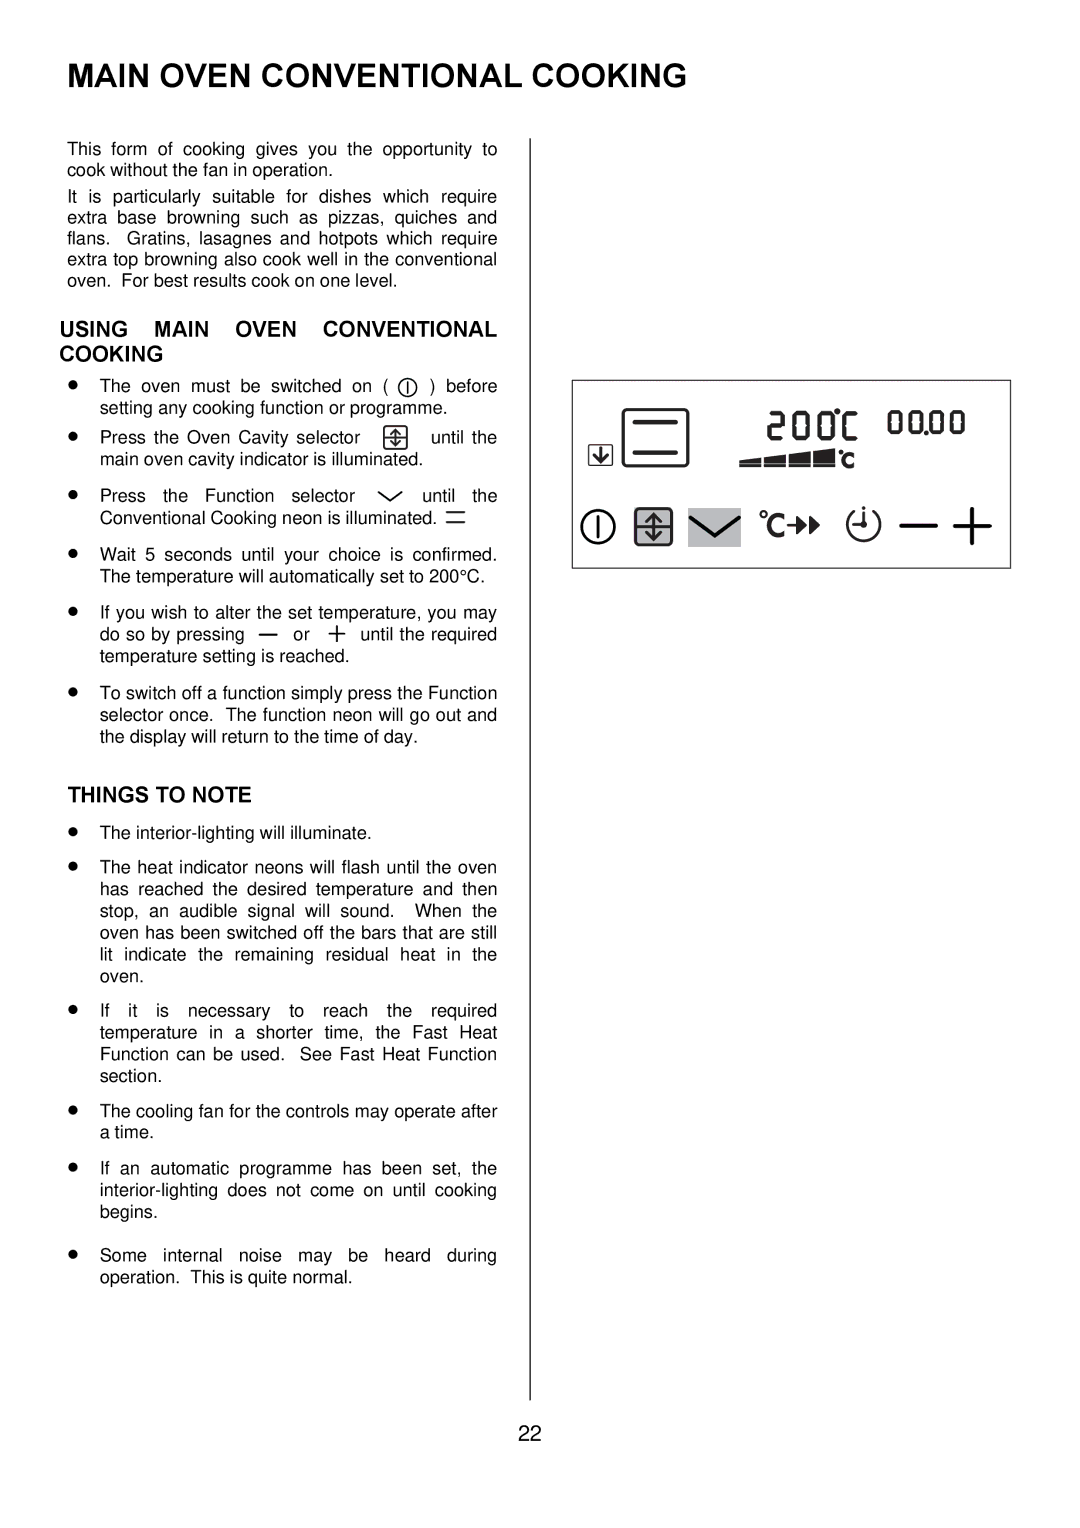 Electrolux D98000VF operating instructions Using Main Oven Conventional Cooking 